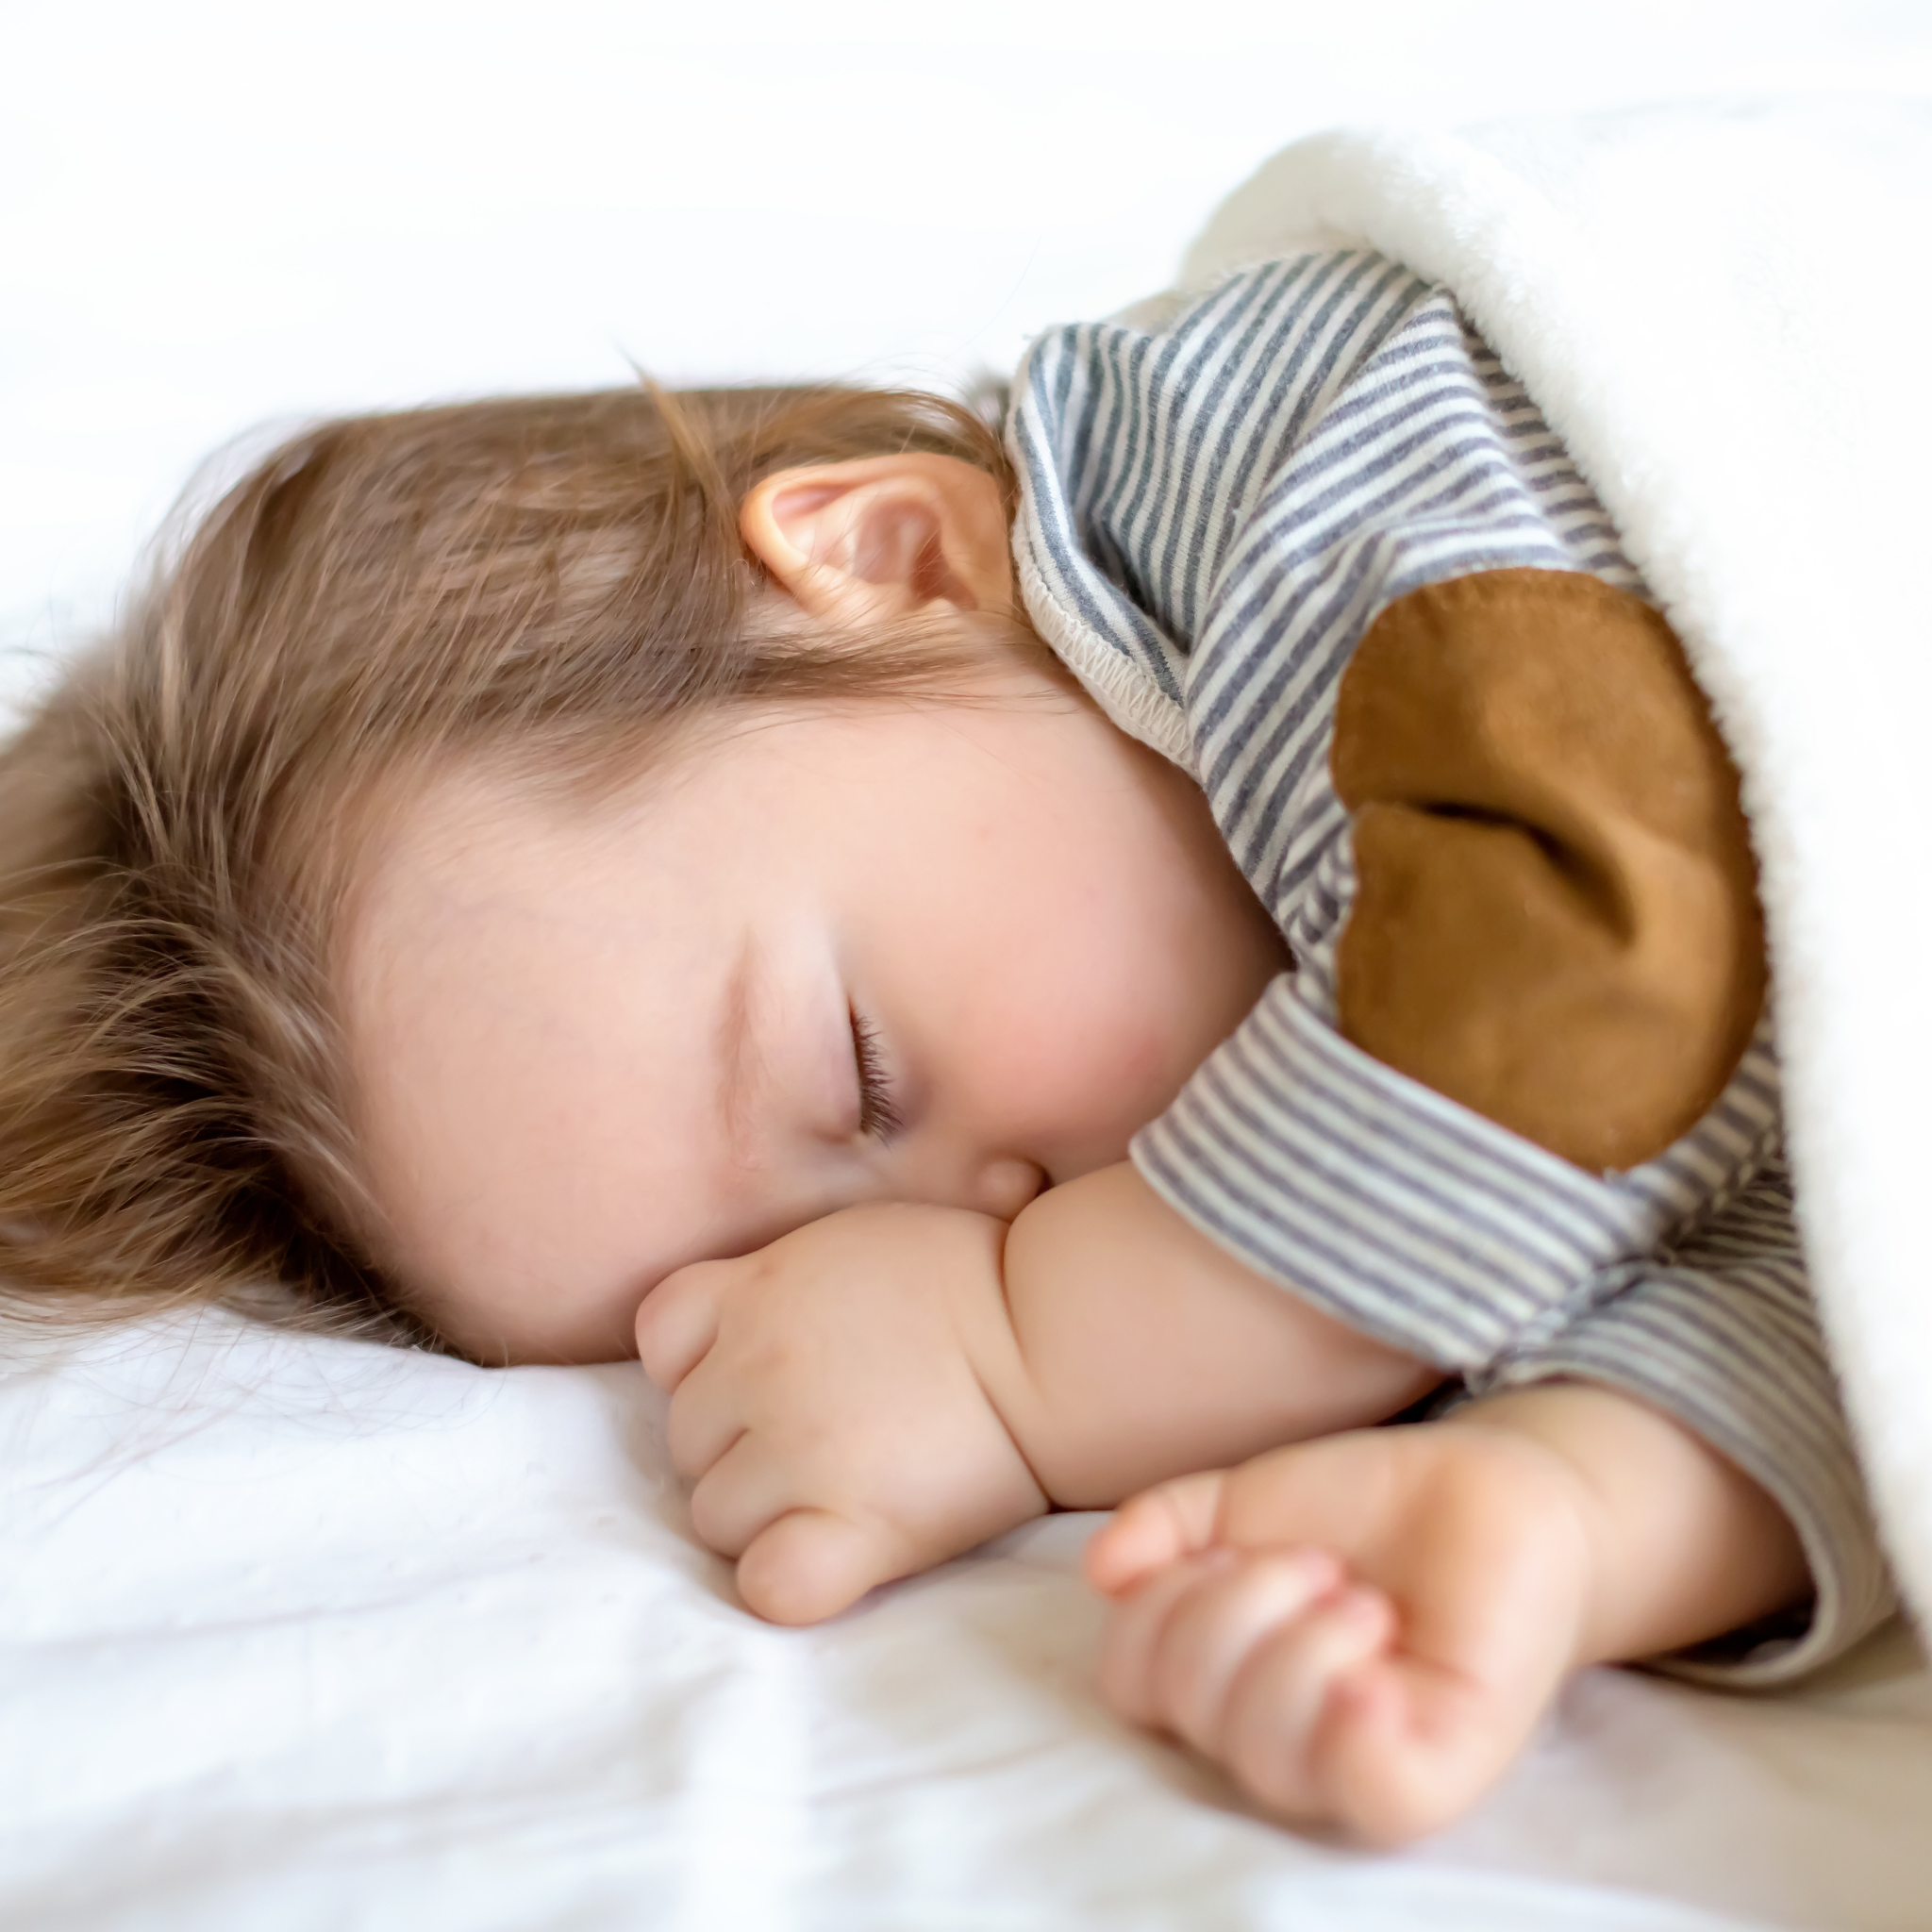 Managing a Sleep Routine When Your Little One Has a 'Danger Nap'